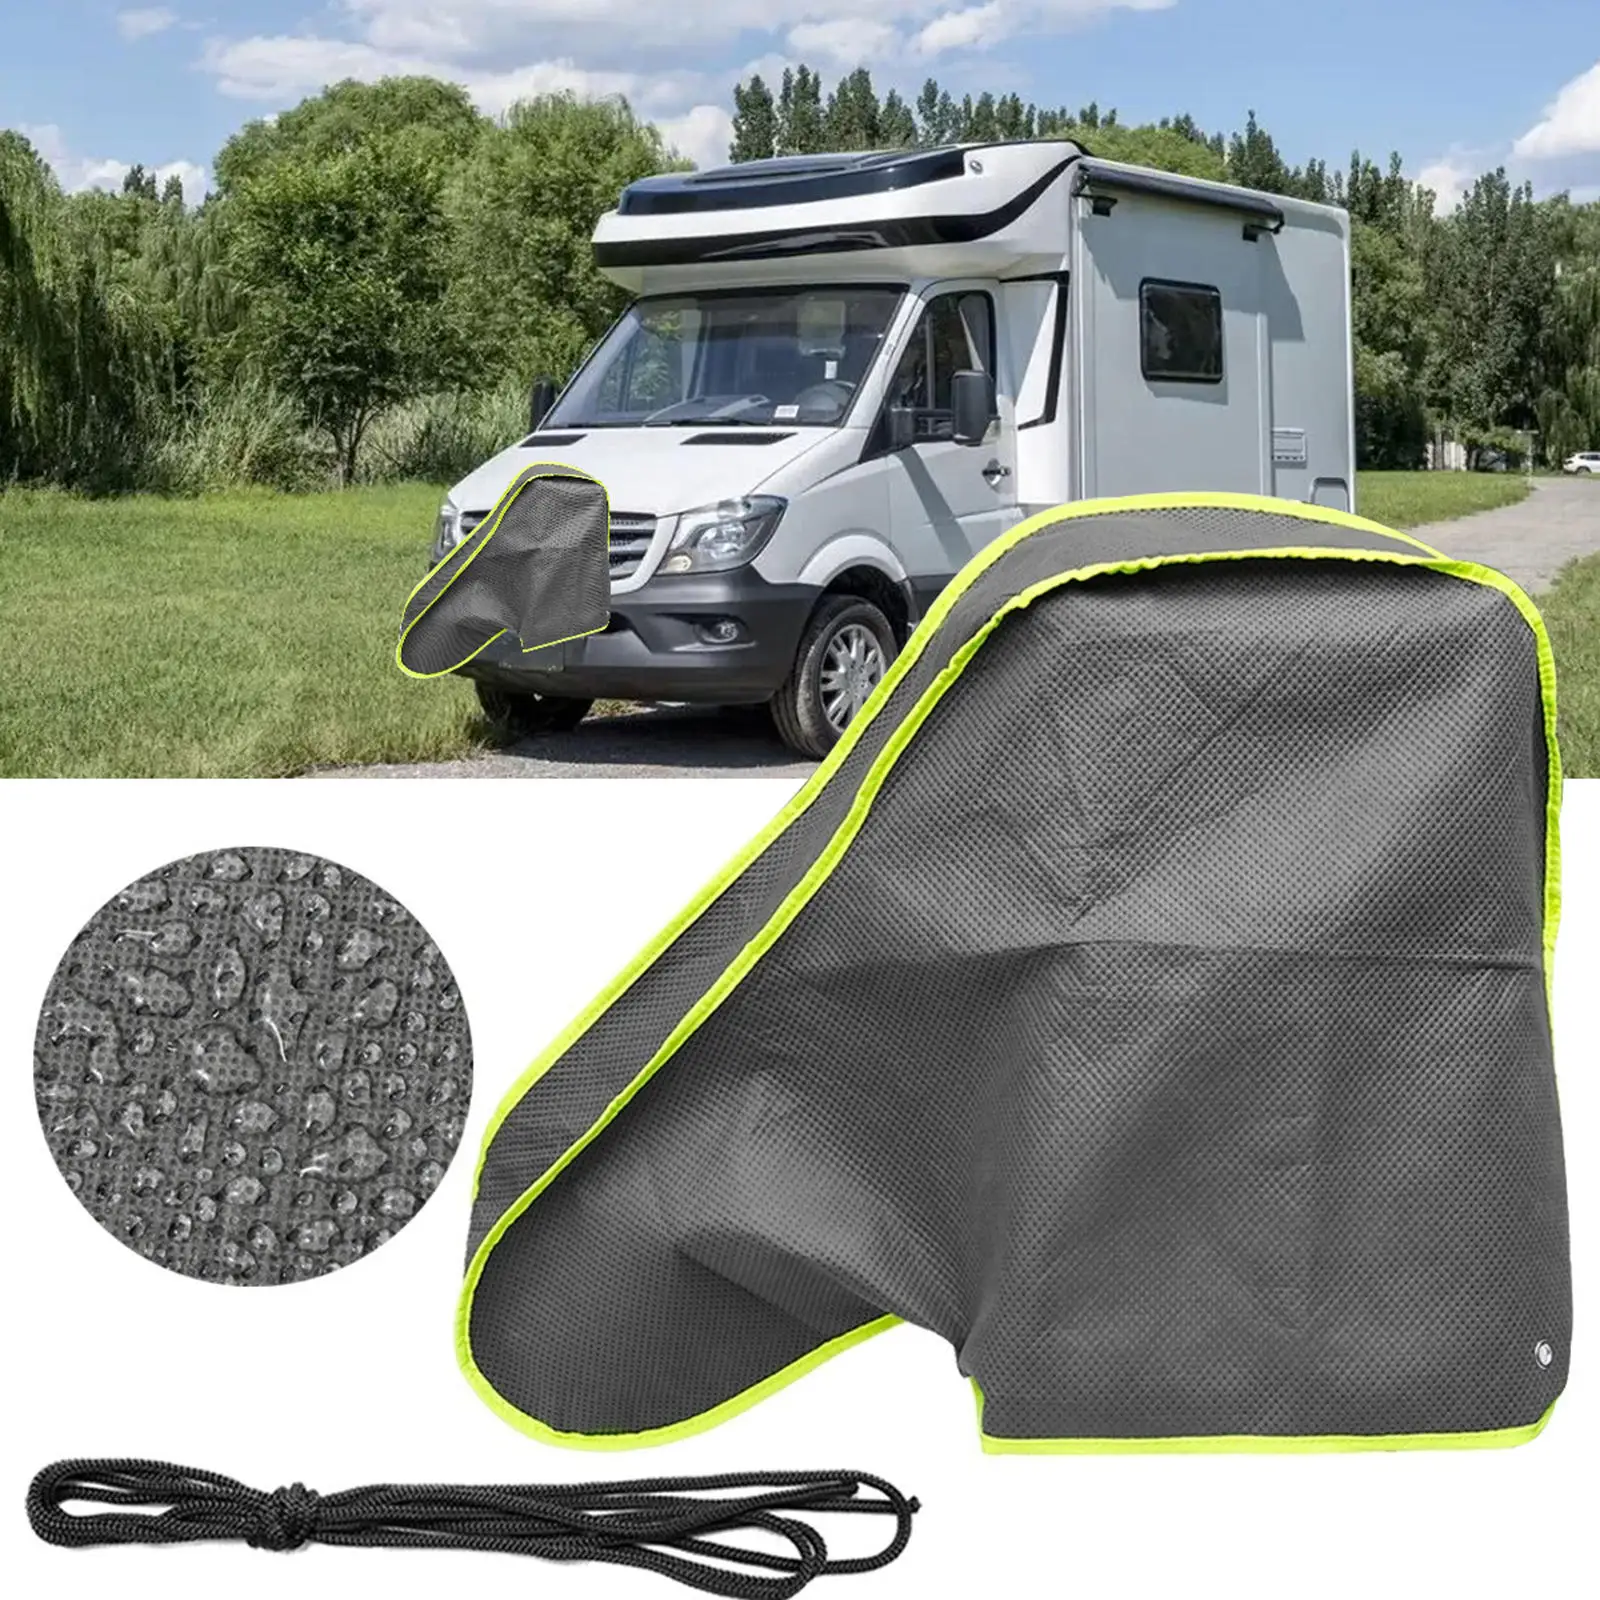 Towing Waterproof Accs 4 Layer Protective Caravan Hitch Cover Fit for Trailer Camper